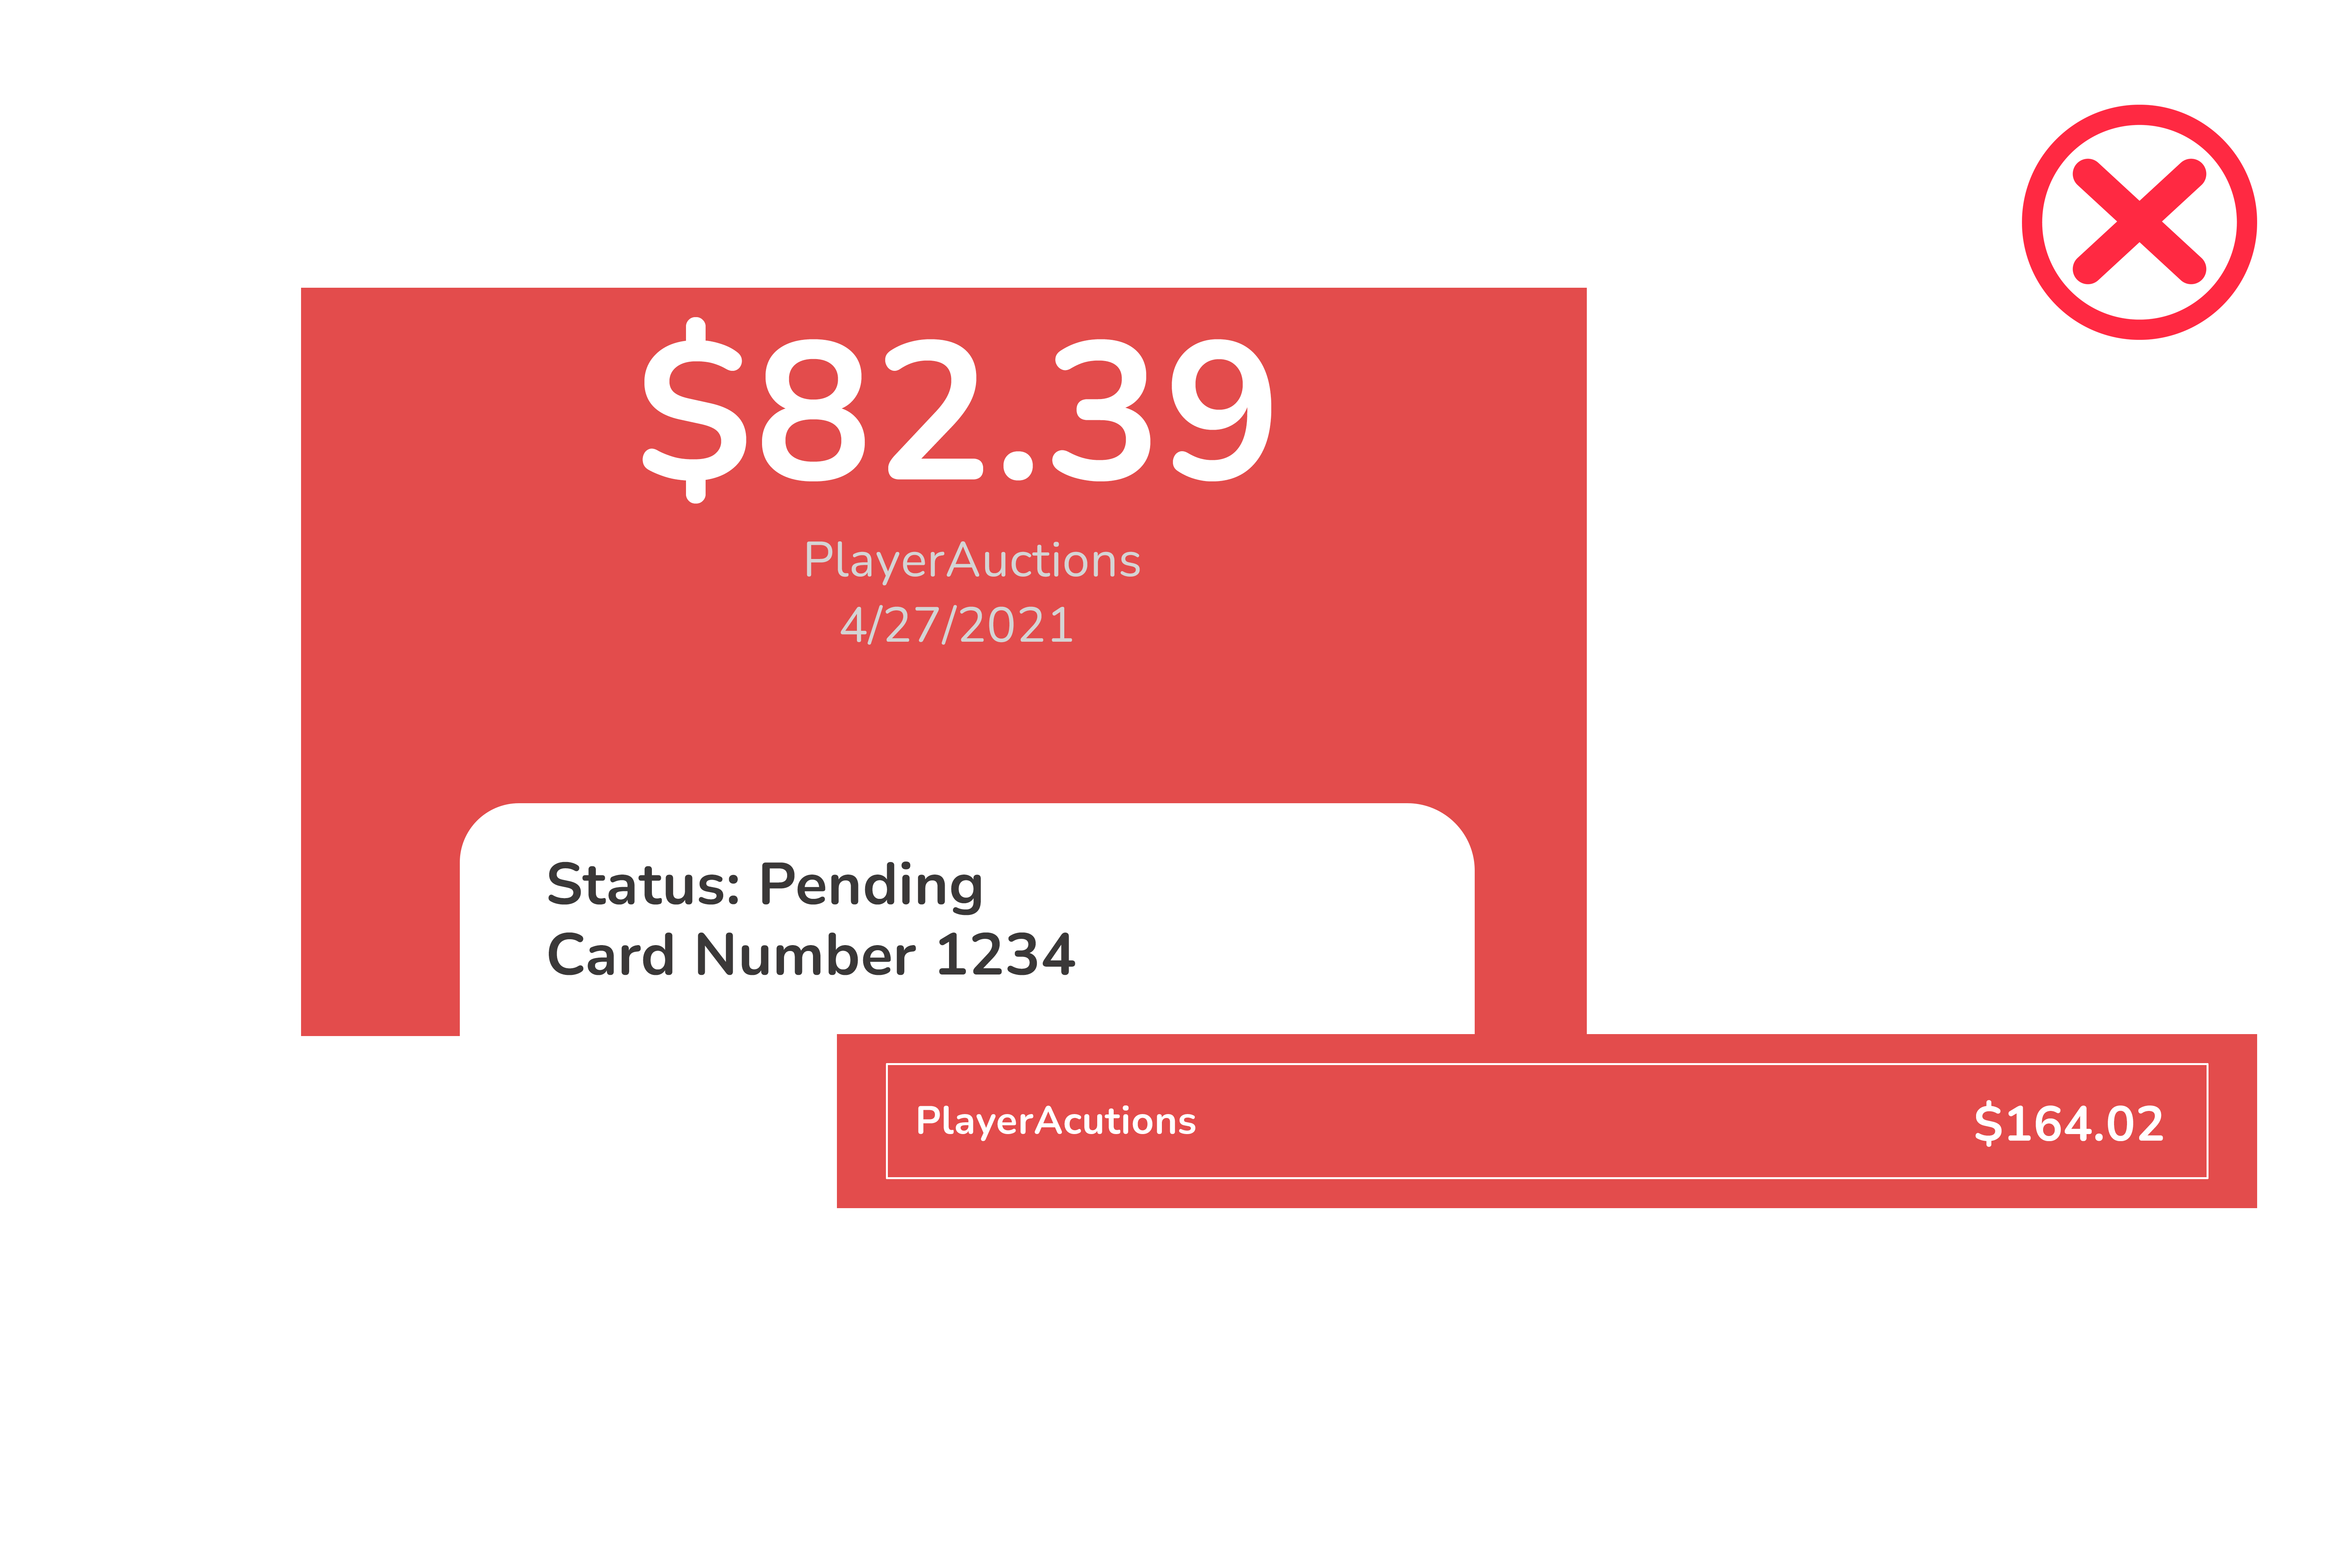 Payment_info_wrong.png